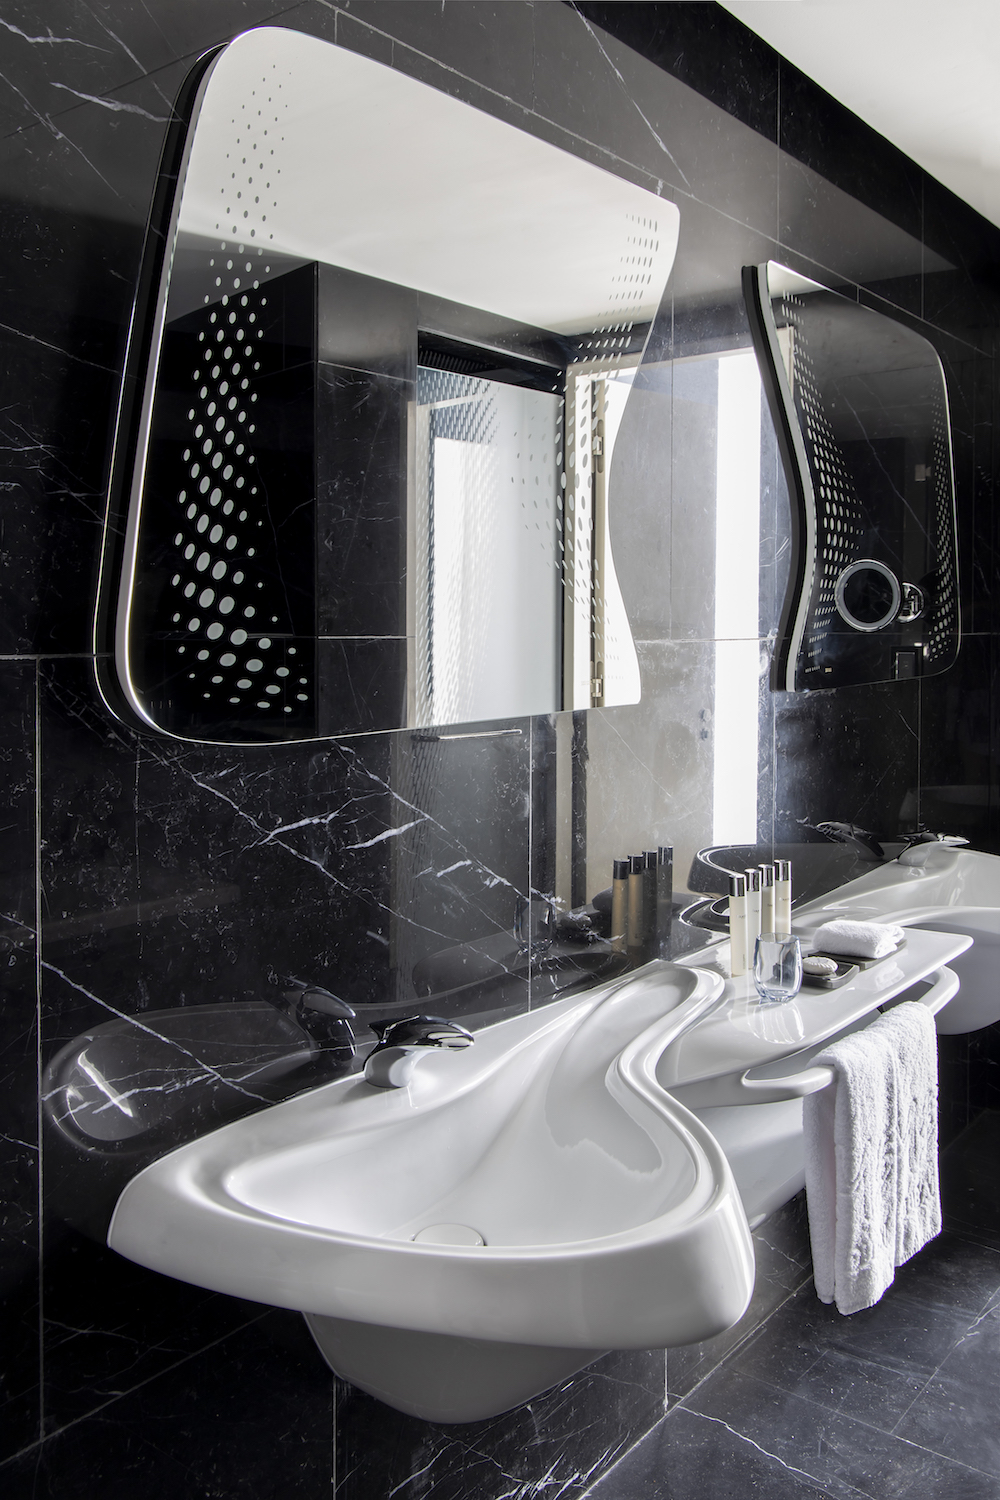 All bathroom fitting are designed by ZHA and follow suit to studio’s typology